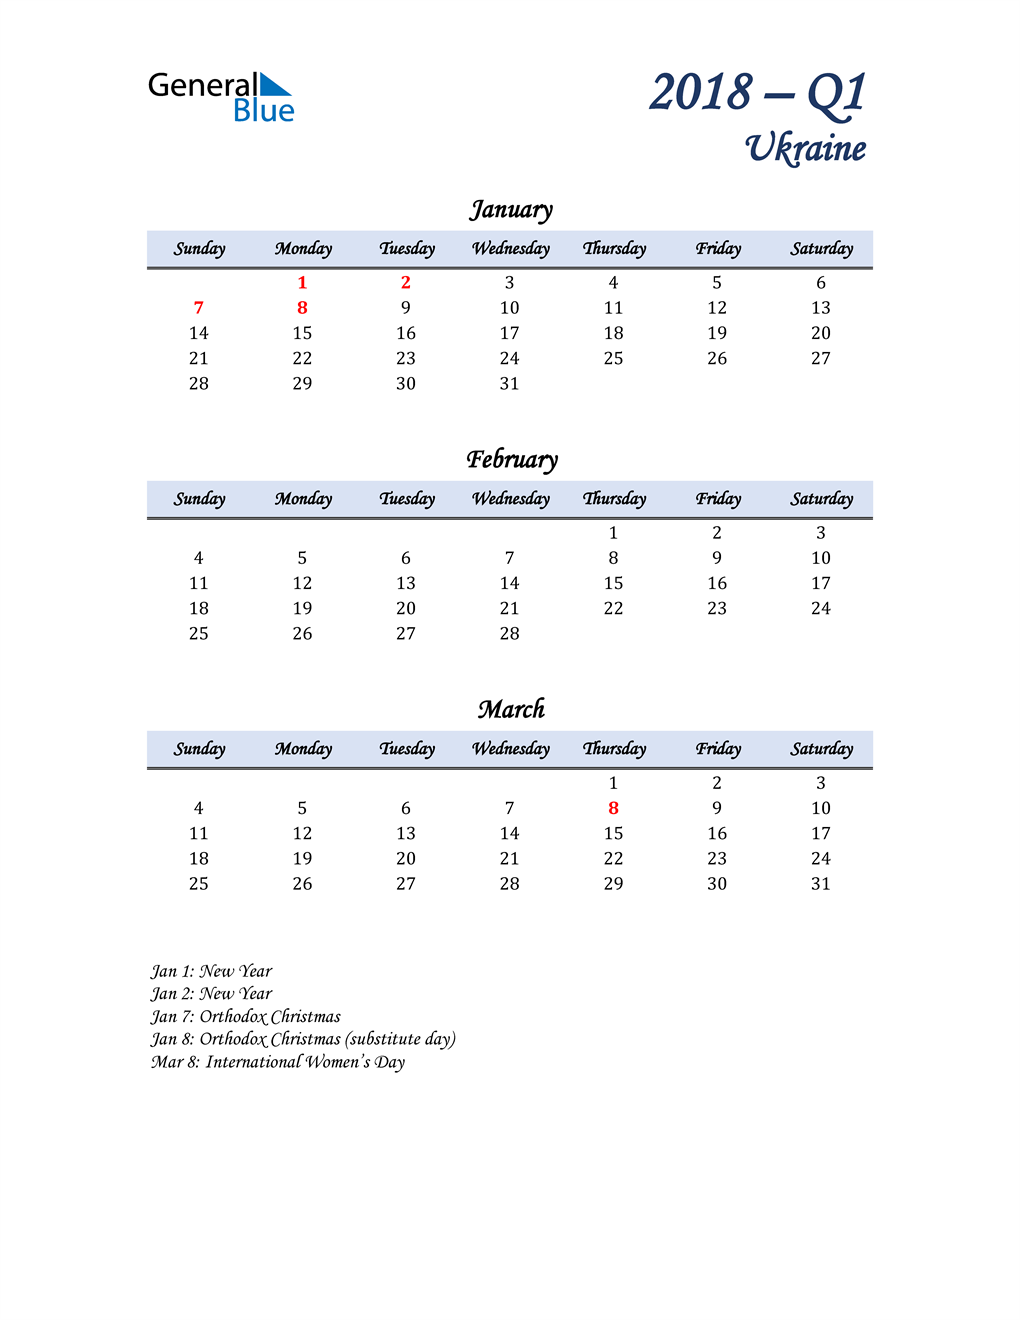  January, February, and March Calendar for Ukraine